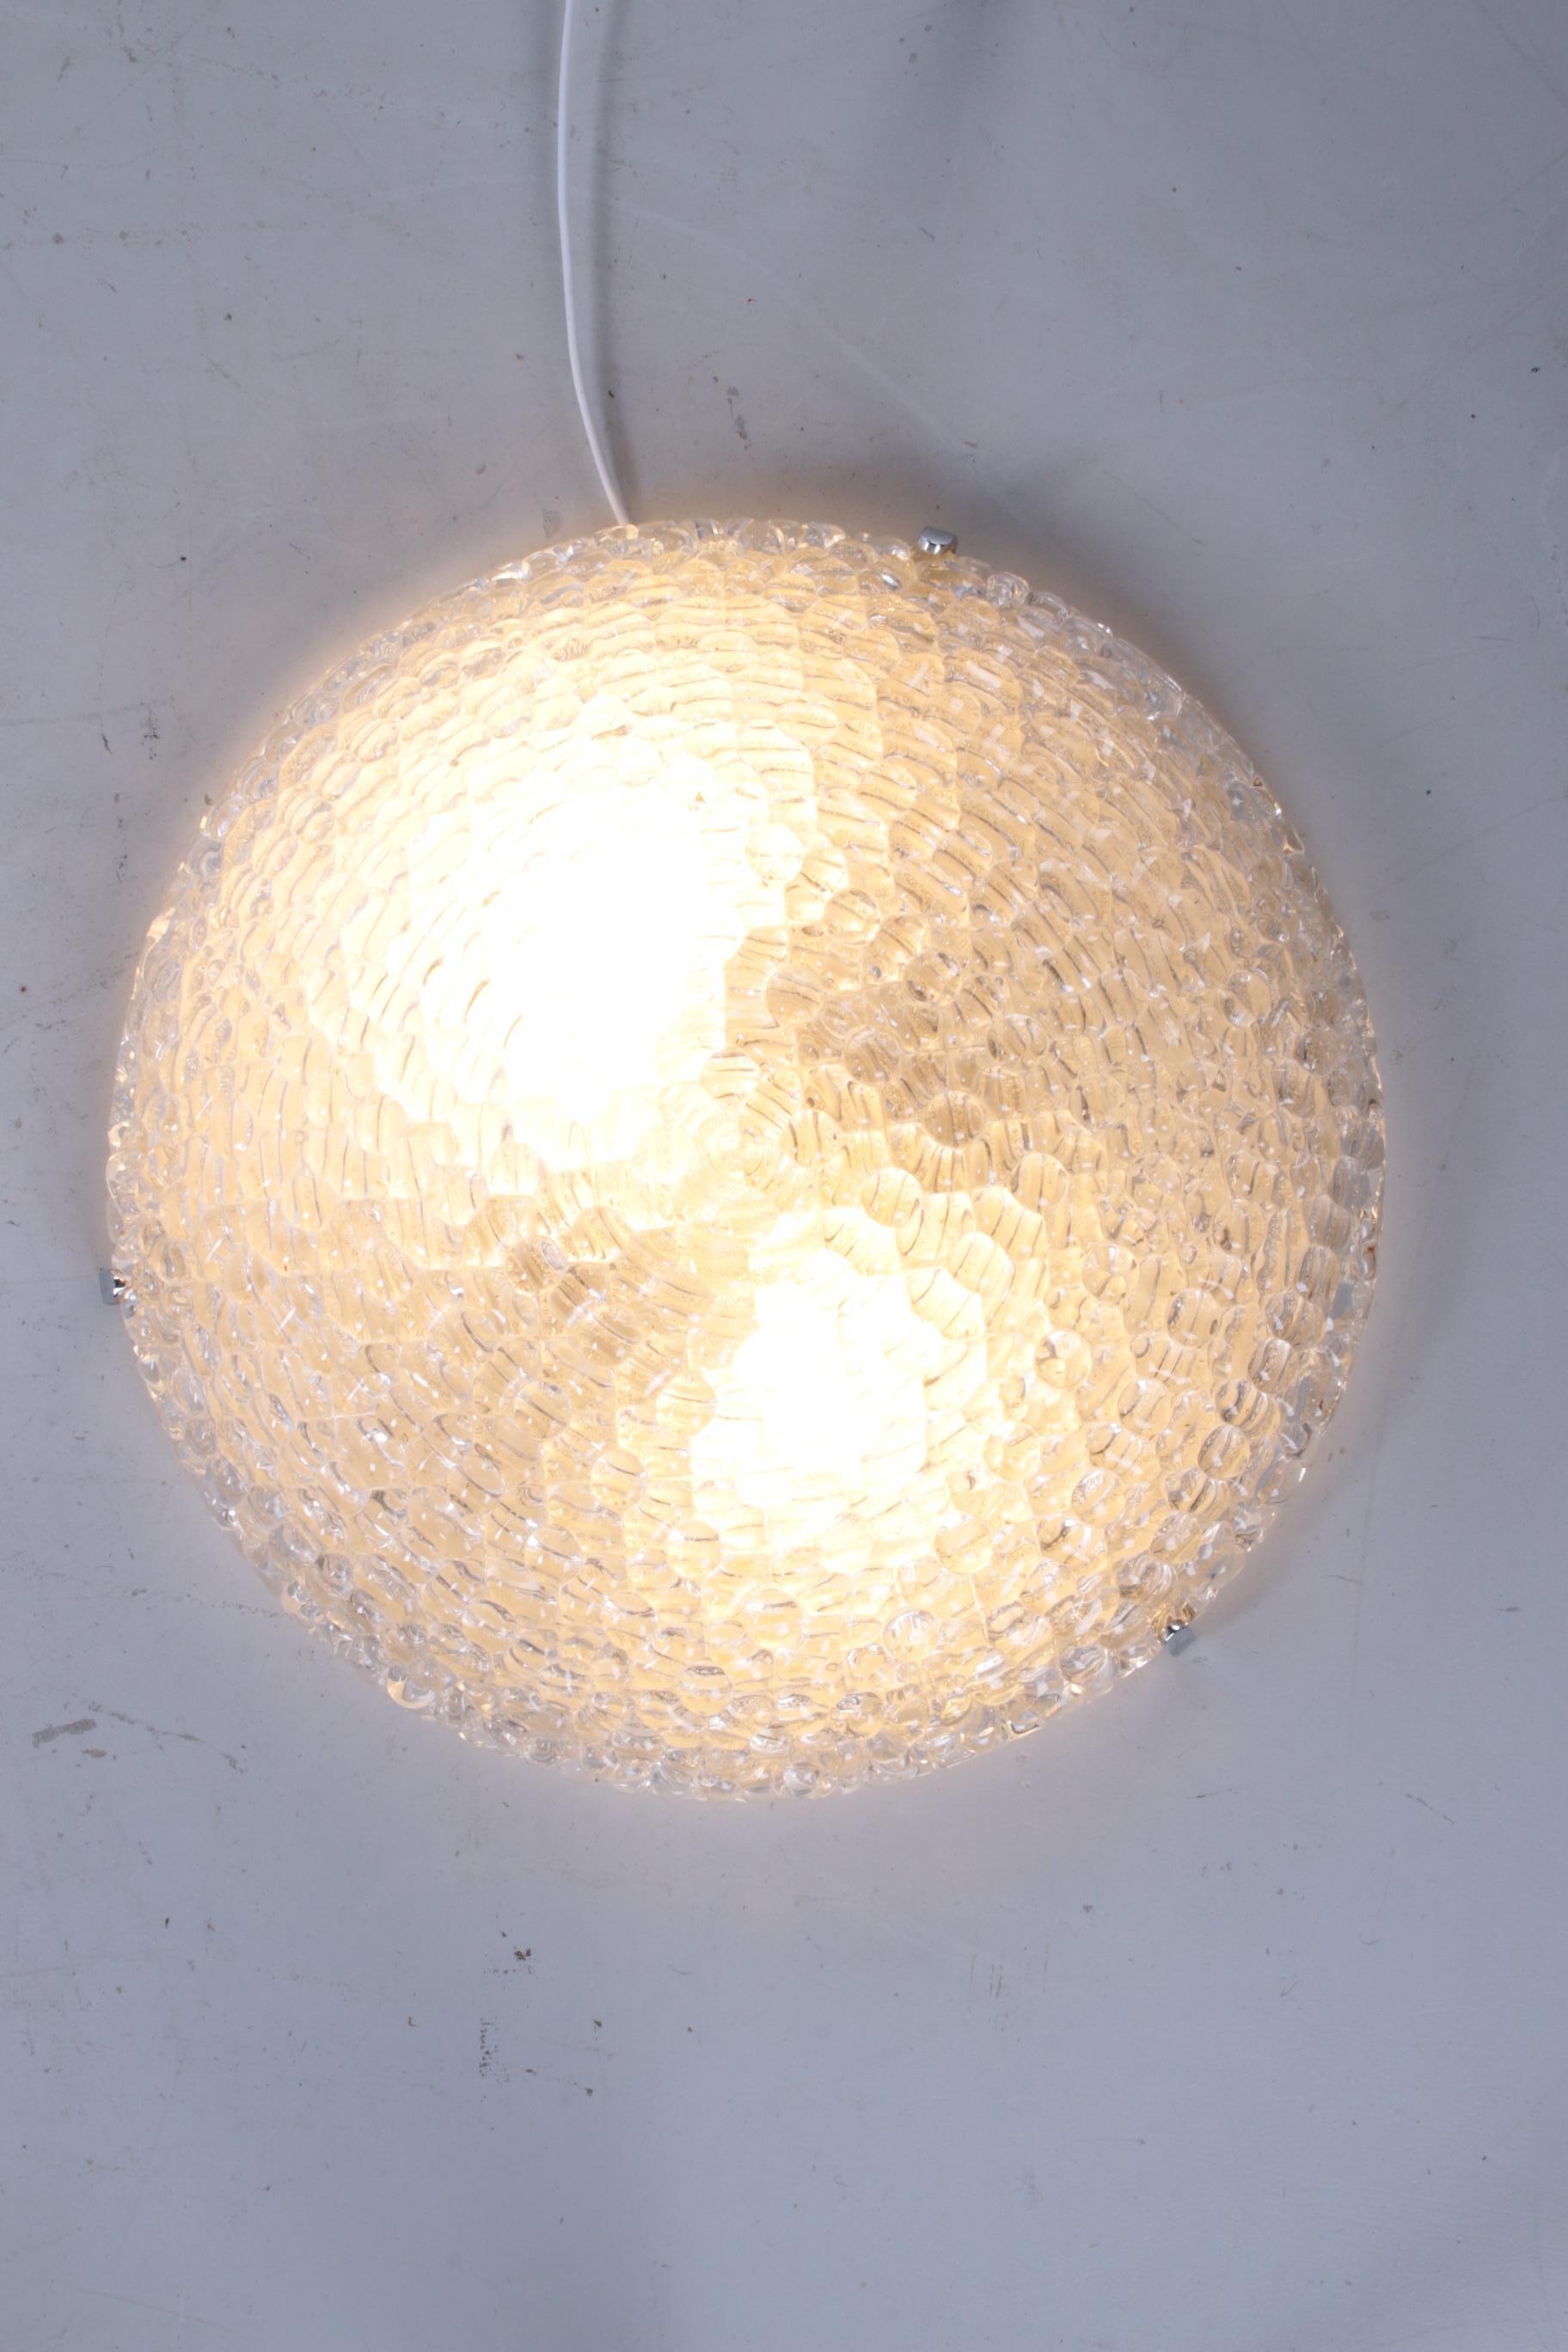 1960s vintage bubble glass ceiling lamp with chrome

The fixture is made of chrome and has a large lampshade, made of thick-walled so-called 